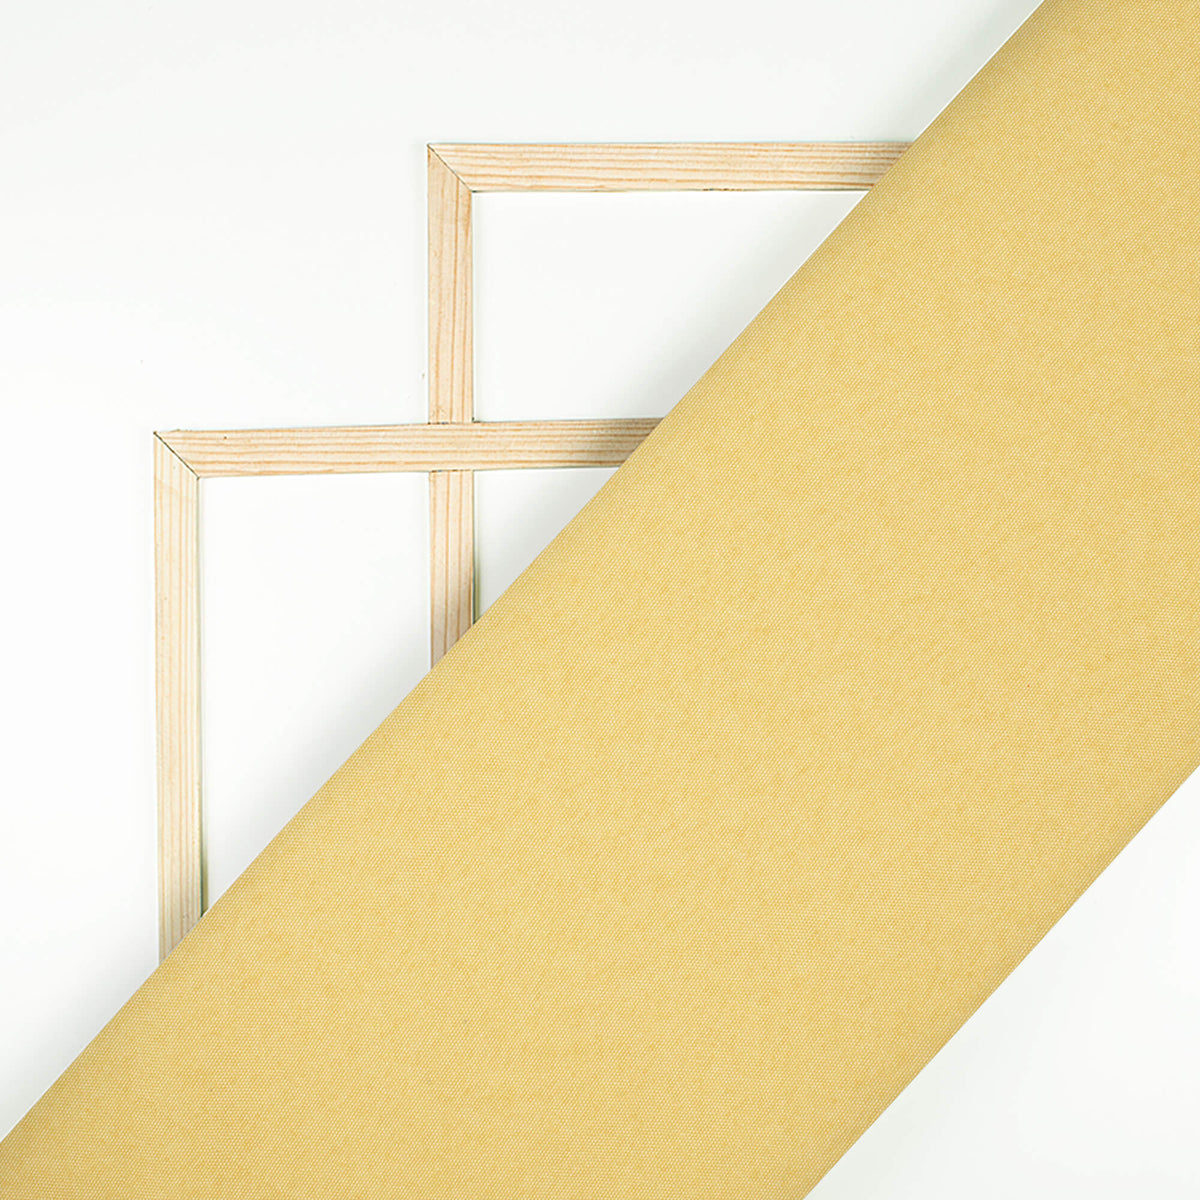 Melow Yellow Plain Lining Butter Crepe Fabric